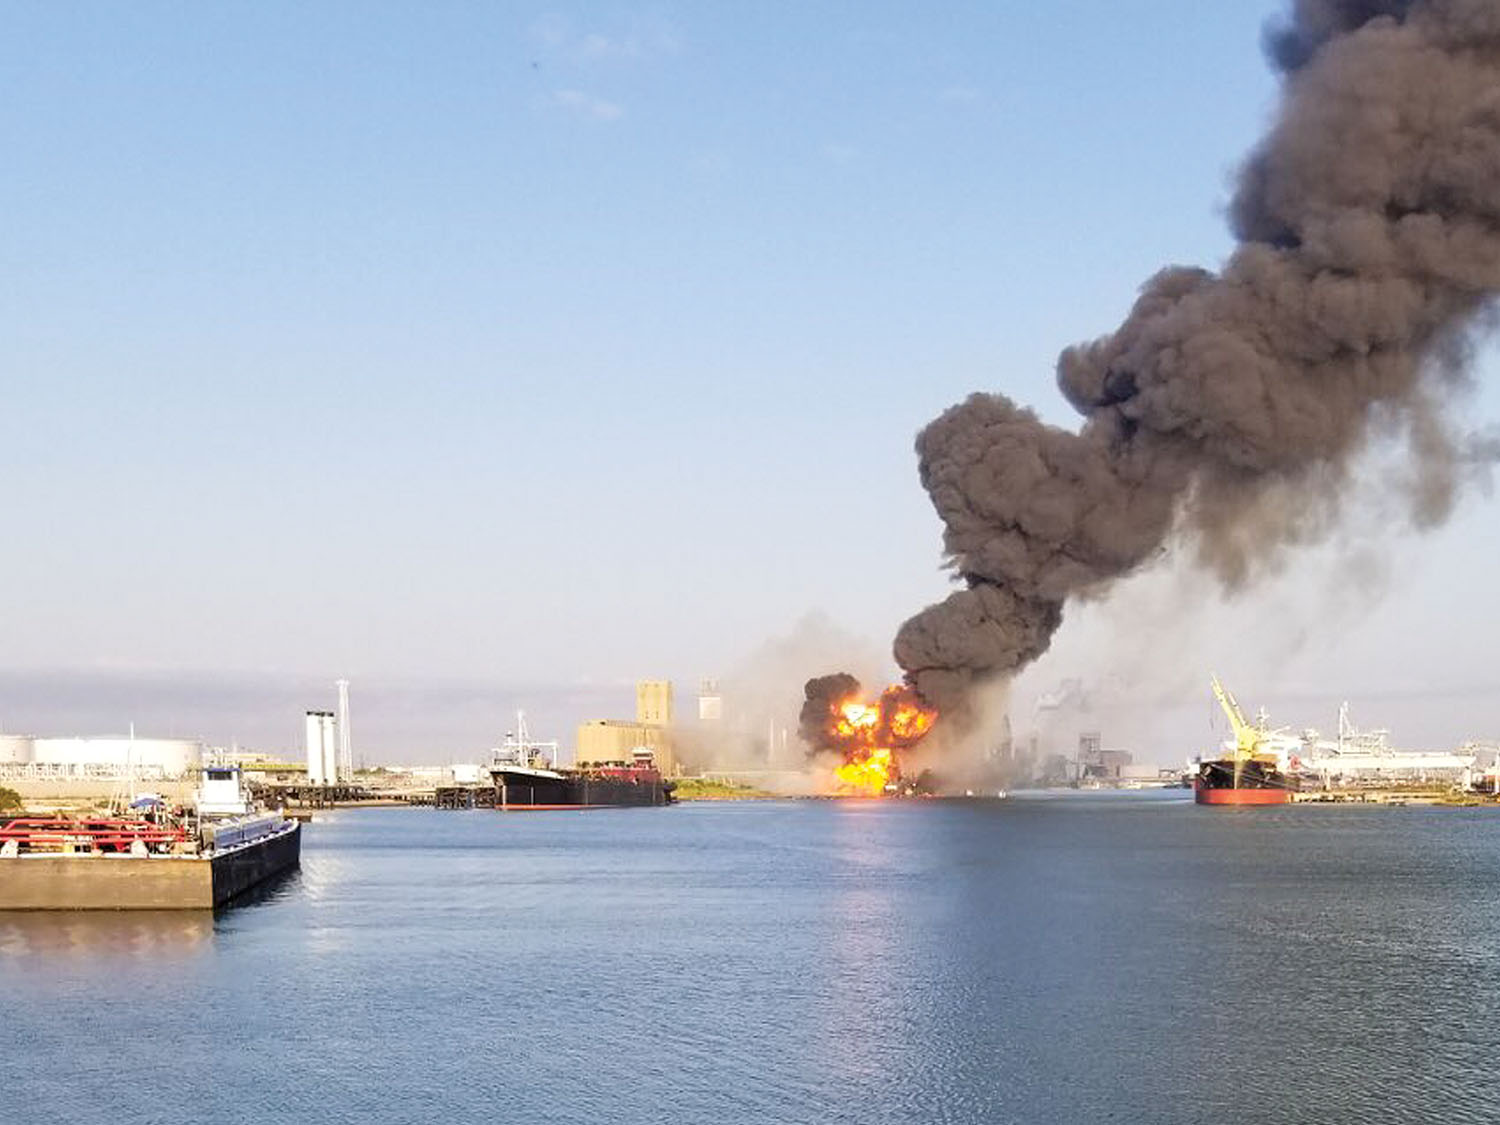 Coast Guard crews respond to a dredge on fire in the Port of Corpus Christi Ship Channel, August 21. A Sector/Air Station Corpus Christi MH-65 Dolphin helicopter crew was launched to the scene, hoisted two injured crewmembers, and transferred them to Corpus Christi Medical Center-Bay Area. (U.S. Coast Guard photo)